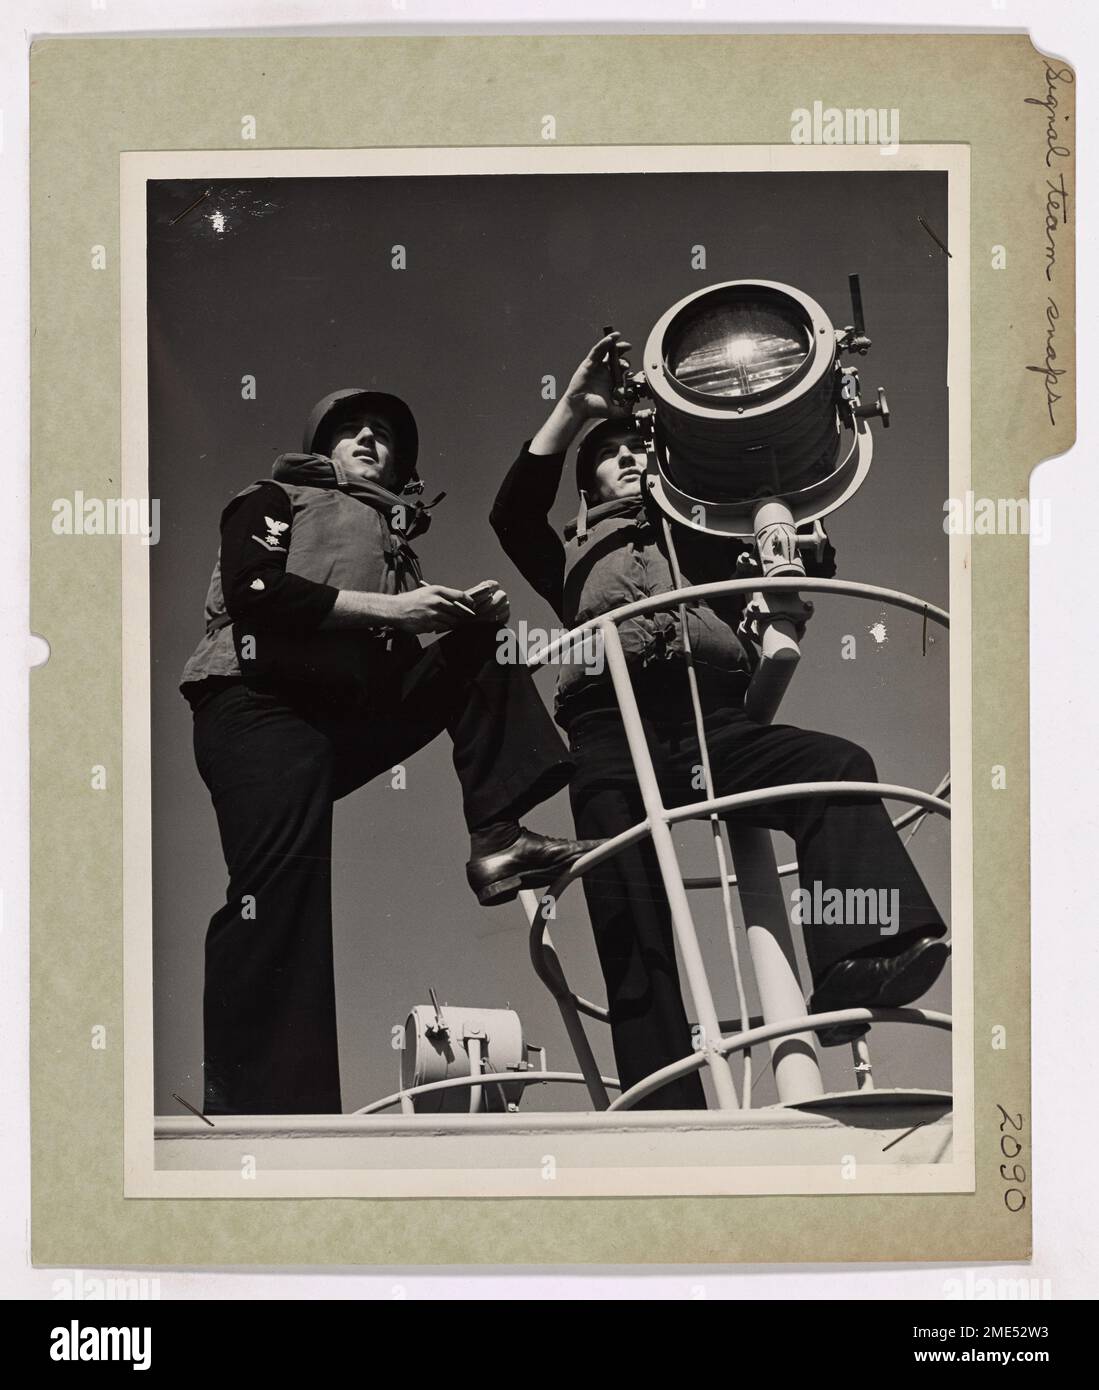 Coast Guardsmen Act as Recorder and Signalman in This Action Shot Aboard a Coast Guard-manned Landing Ship. Signal Team Snaps Into it on LST Unit. Coast Guardsmen C. W. Haaren, left, Q.M.3c of New York City and Corte Severino, S.M.3c, of Chicago, act as recorder and signalman in this action shot aboard a Coast Guard-manned LST (Landing Ship, Tanks). These men are expert operators of the vital blinker communications system employed by the Coast Guard on all sea-going units. Stock Photo